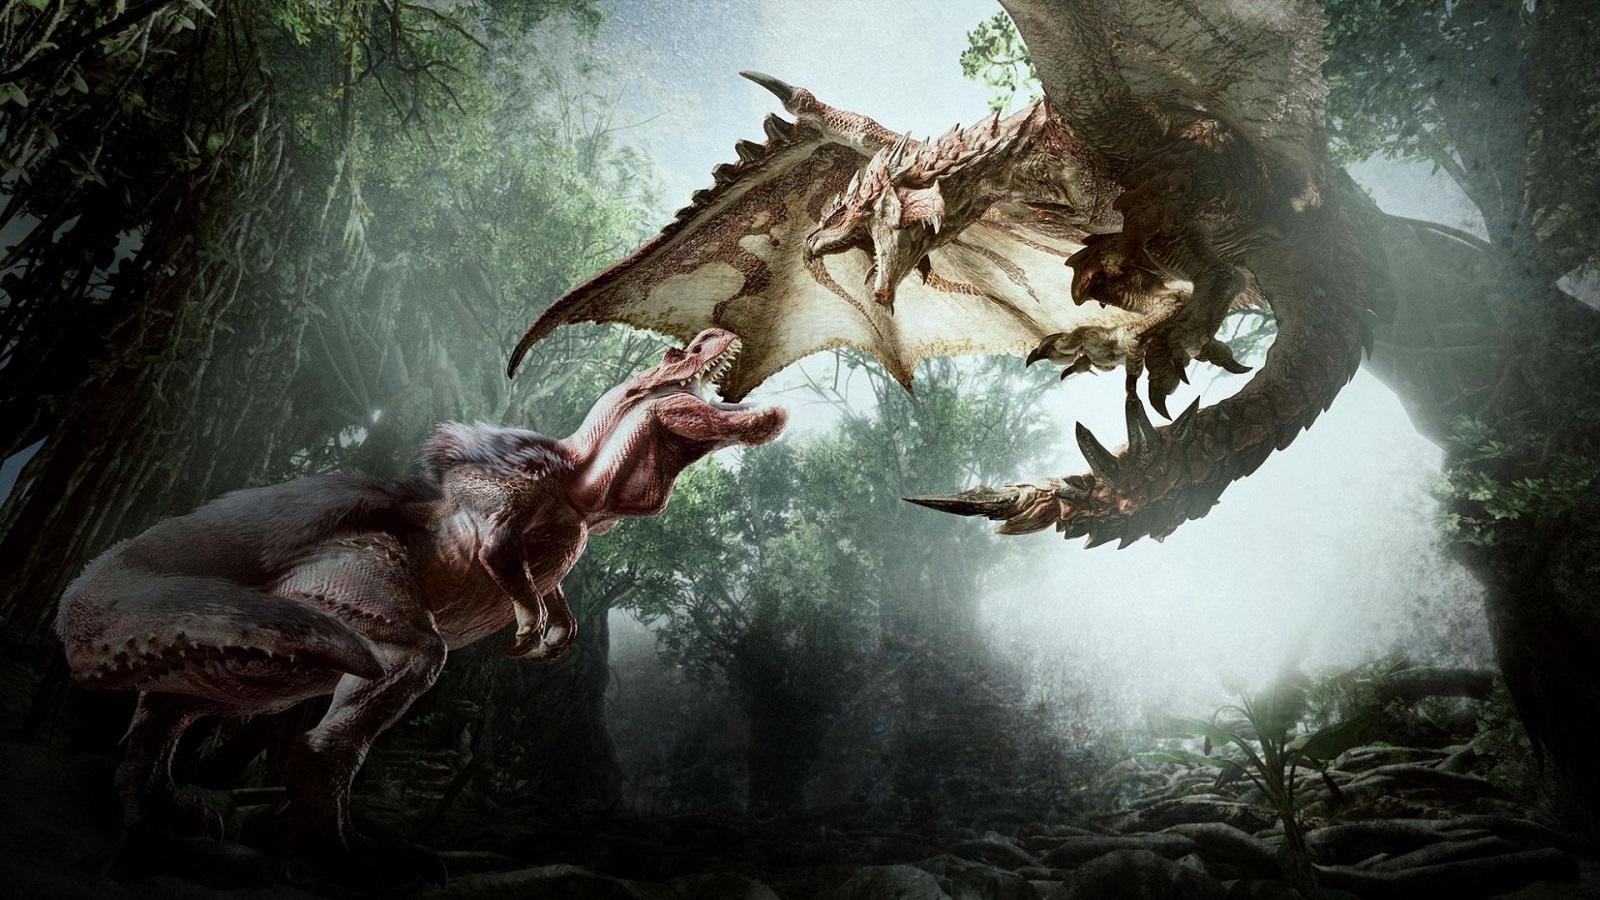 Monsters fighting in a forest